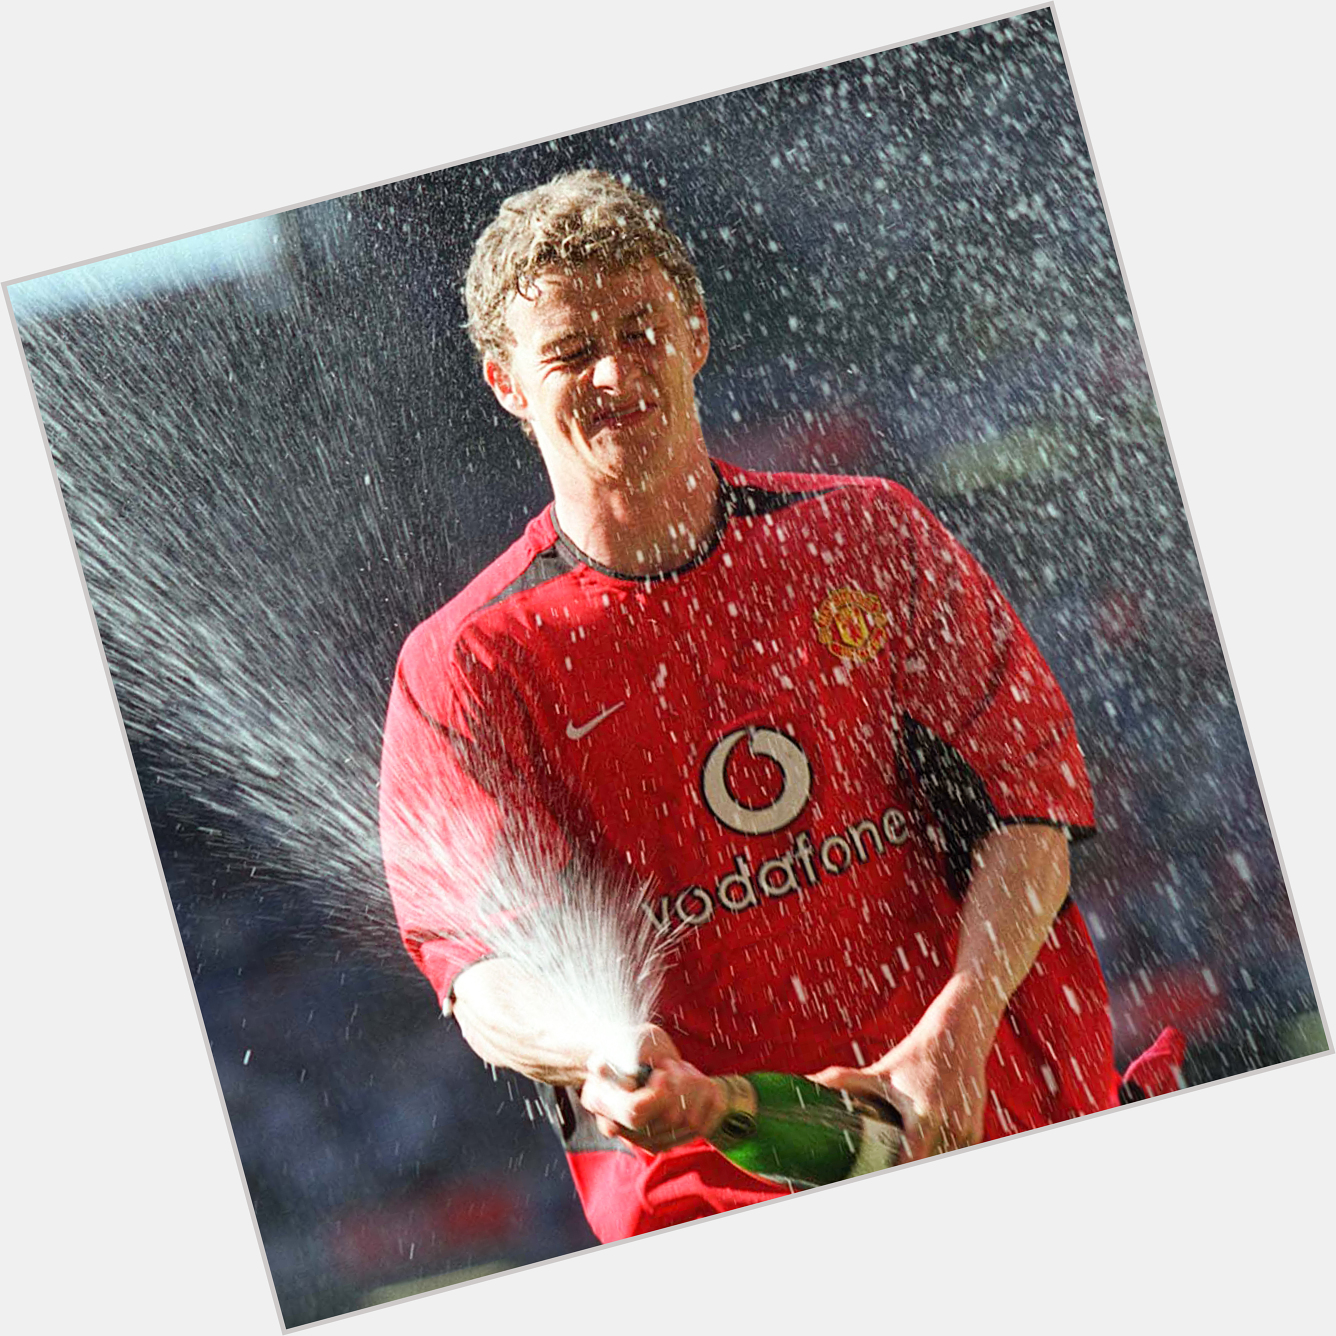  1999 2004

Two-time FA Cup winner with happy birthday Ole Gunnar Solskjær! 